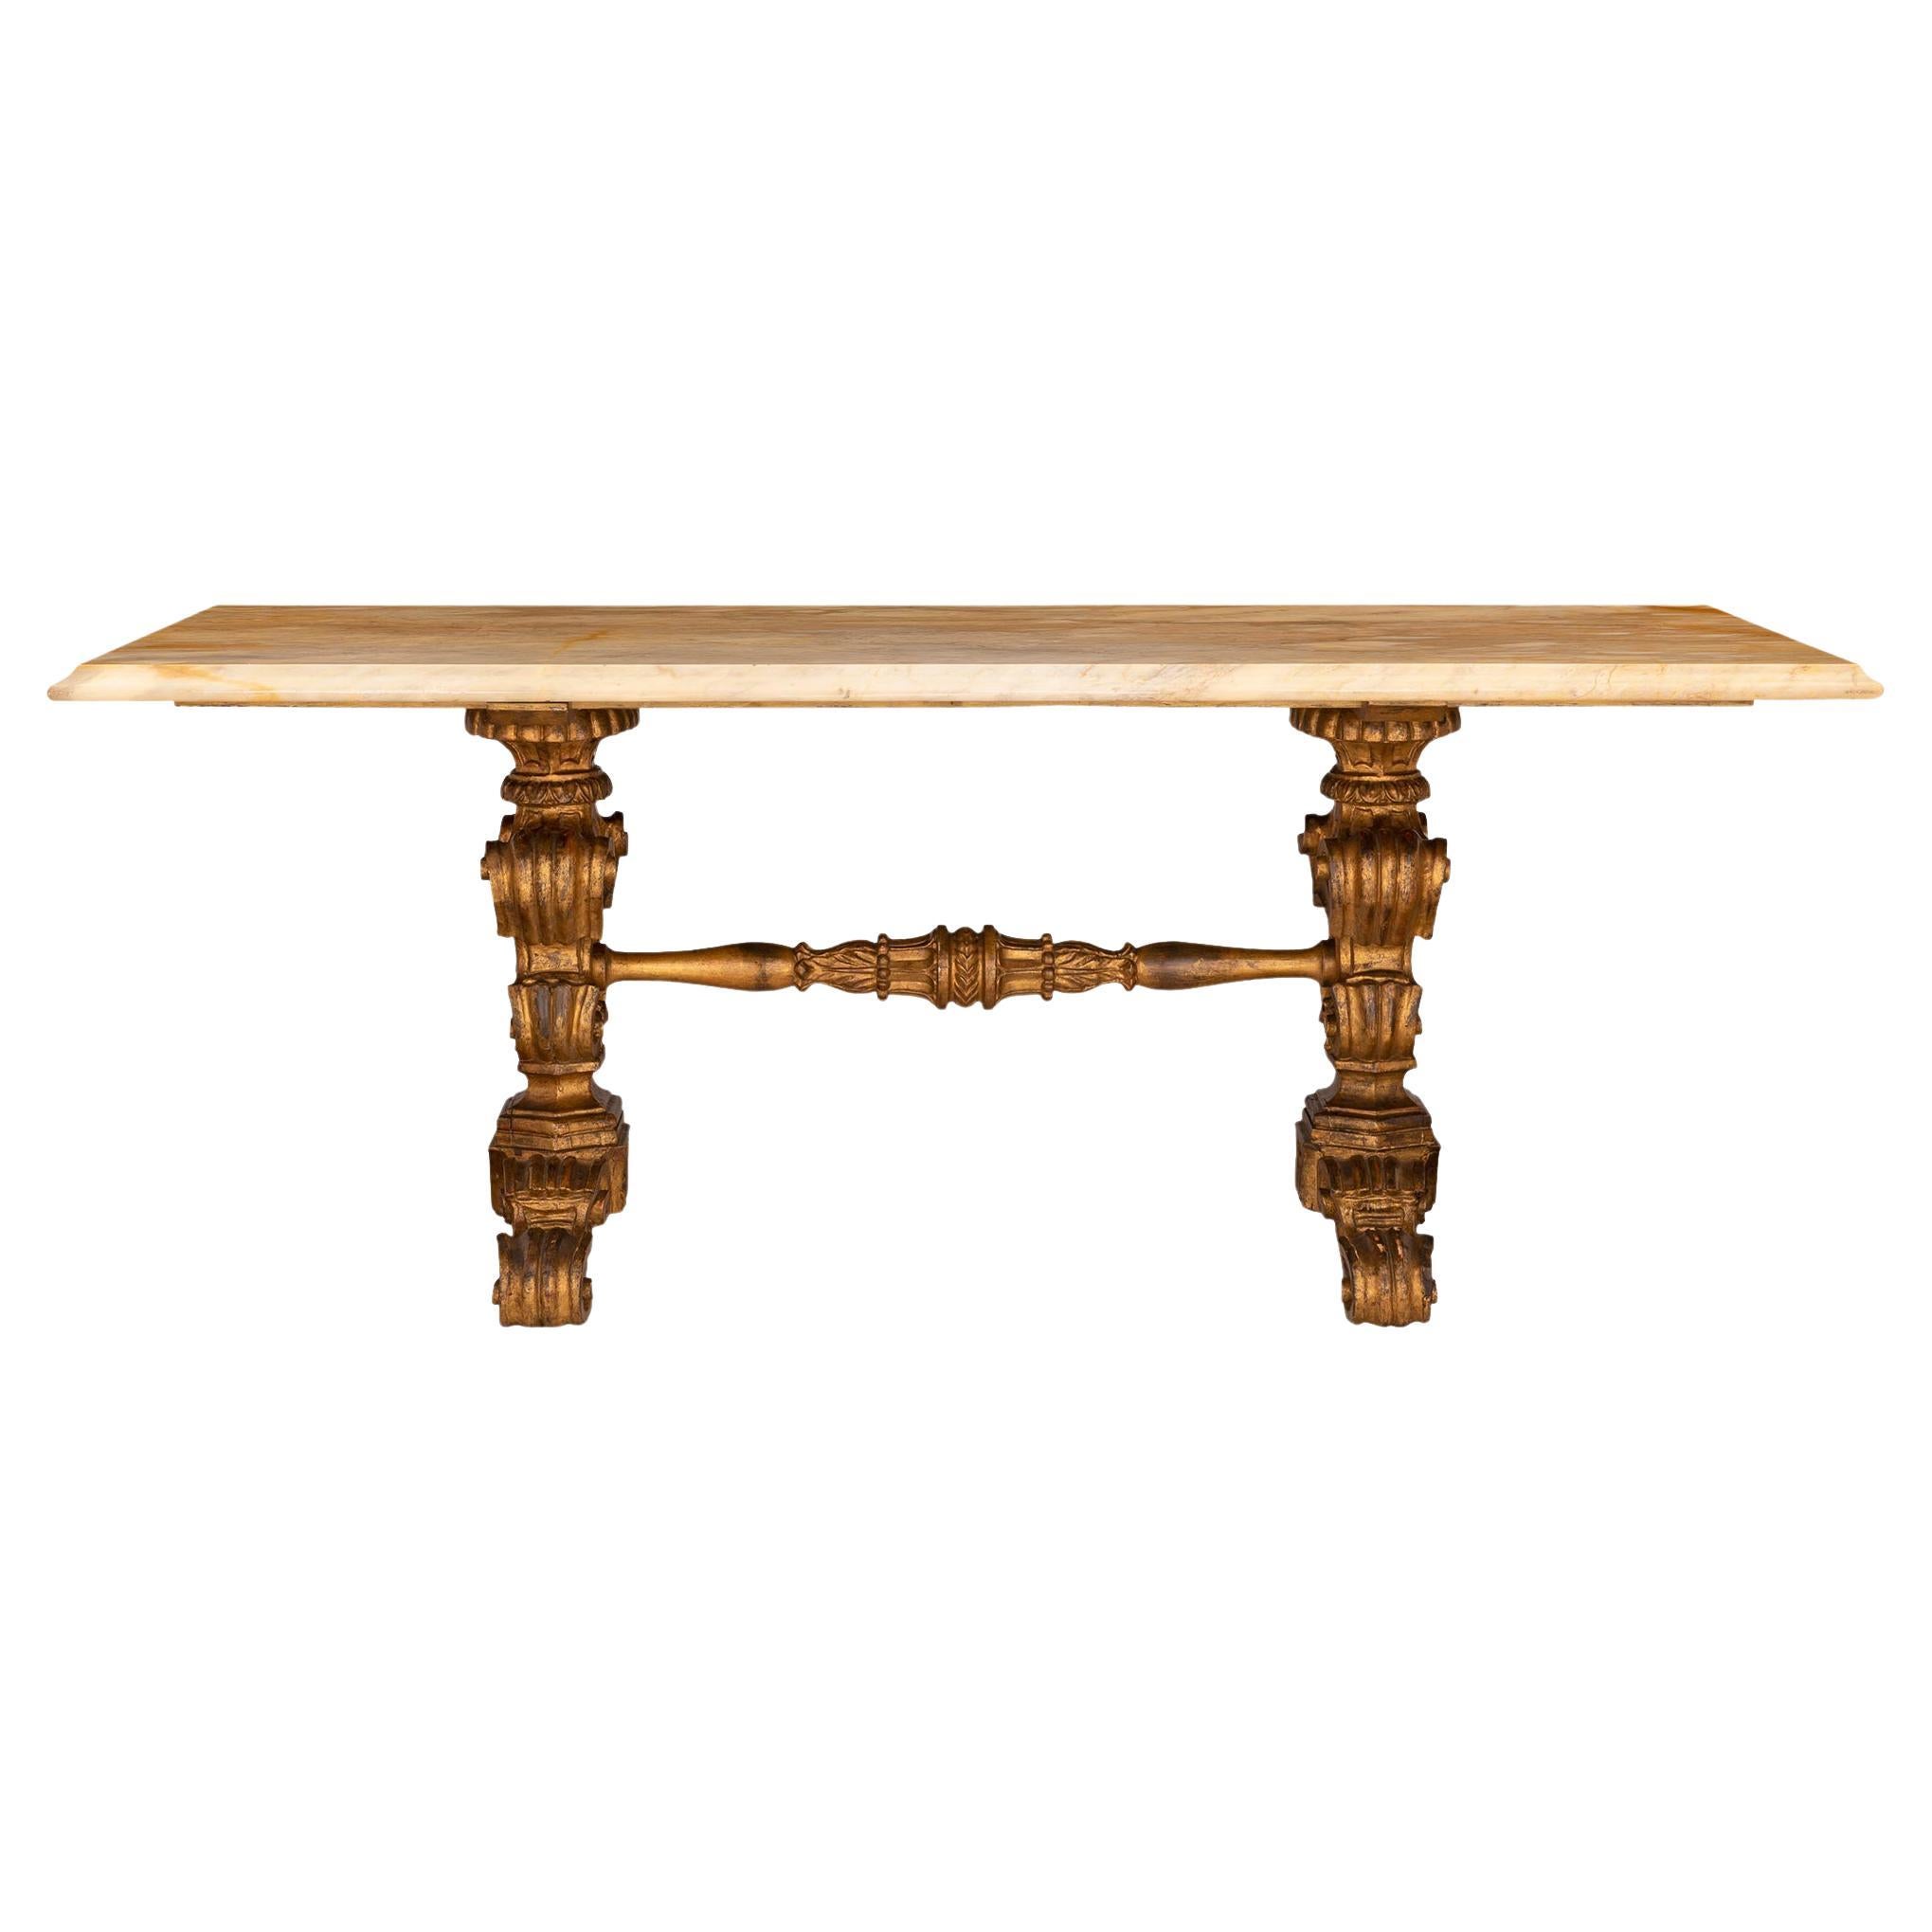 Italian Mid-19th Century Center Table in Mecca and Jaune de Sienne Marble